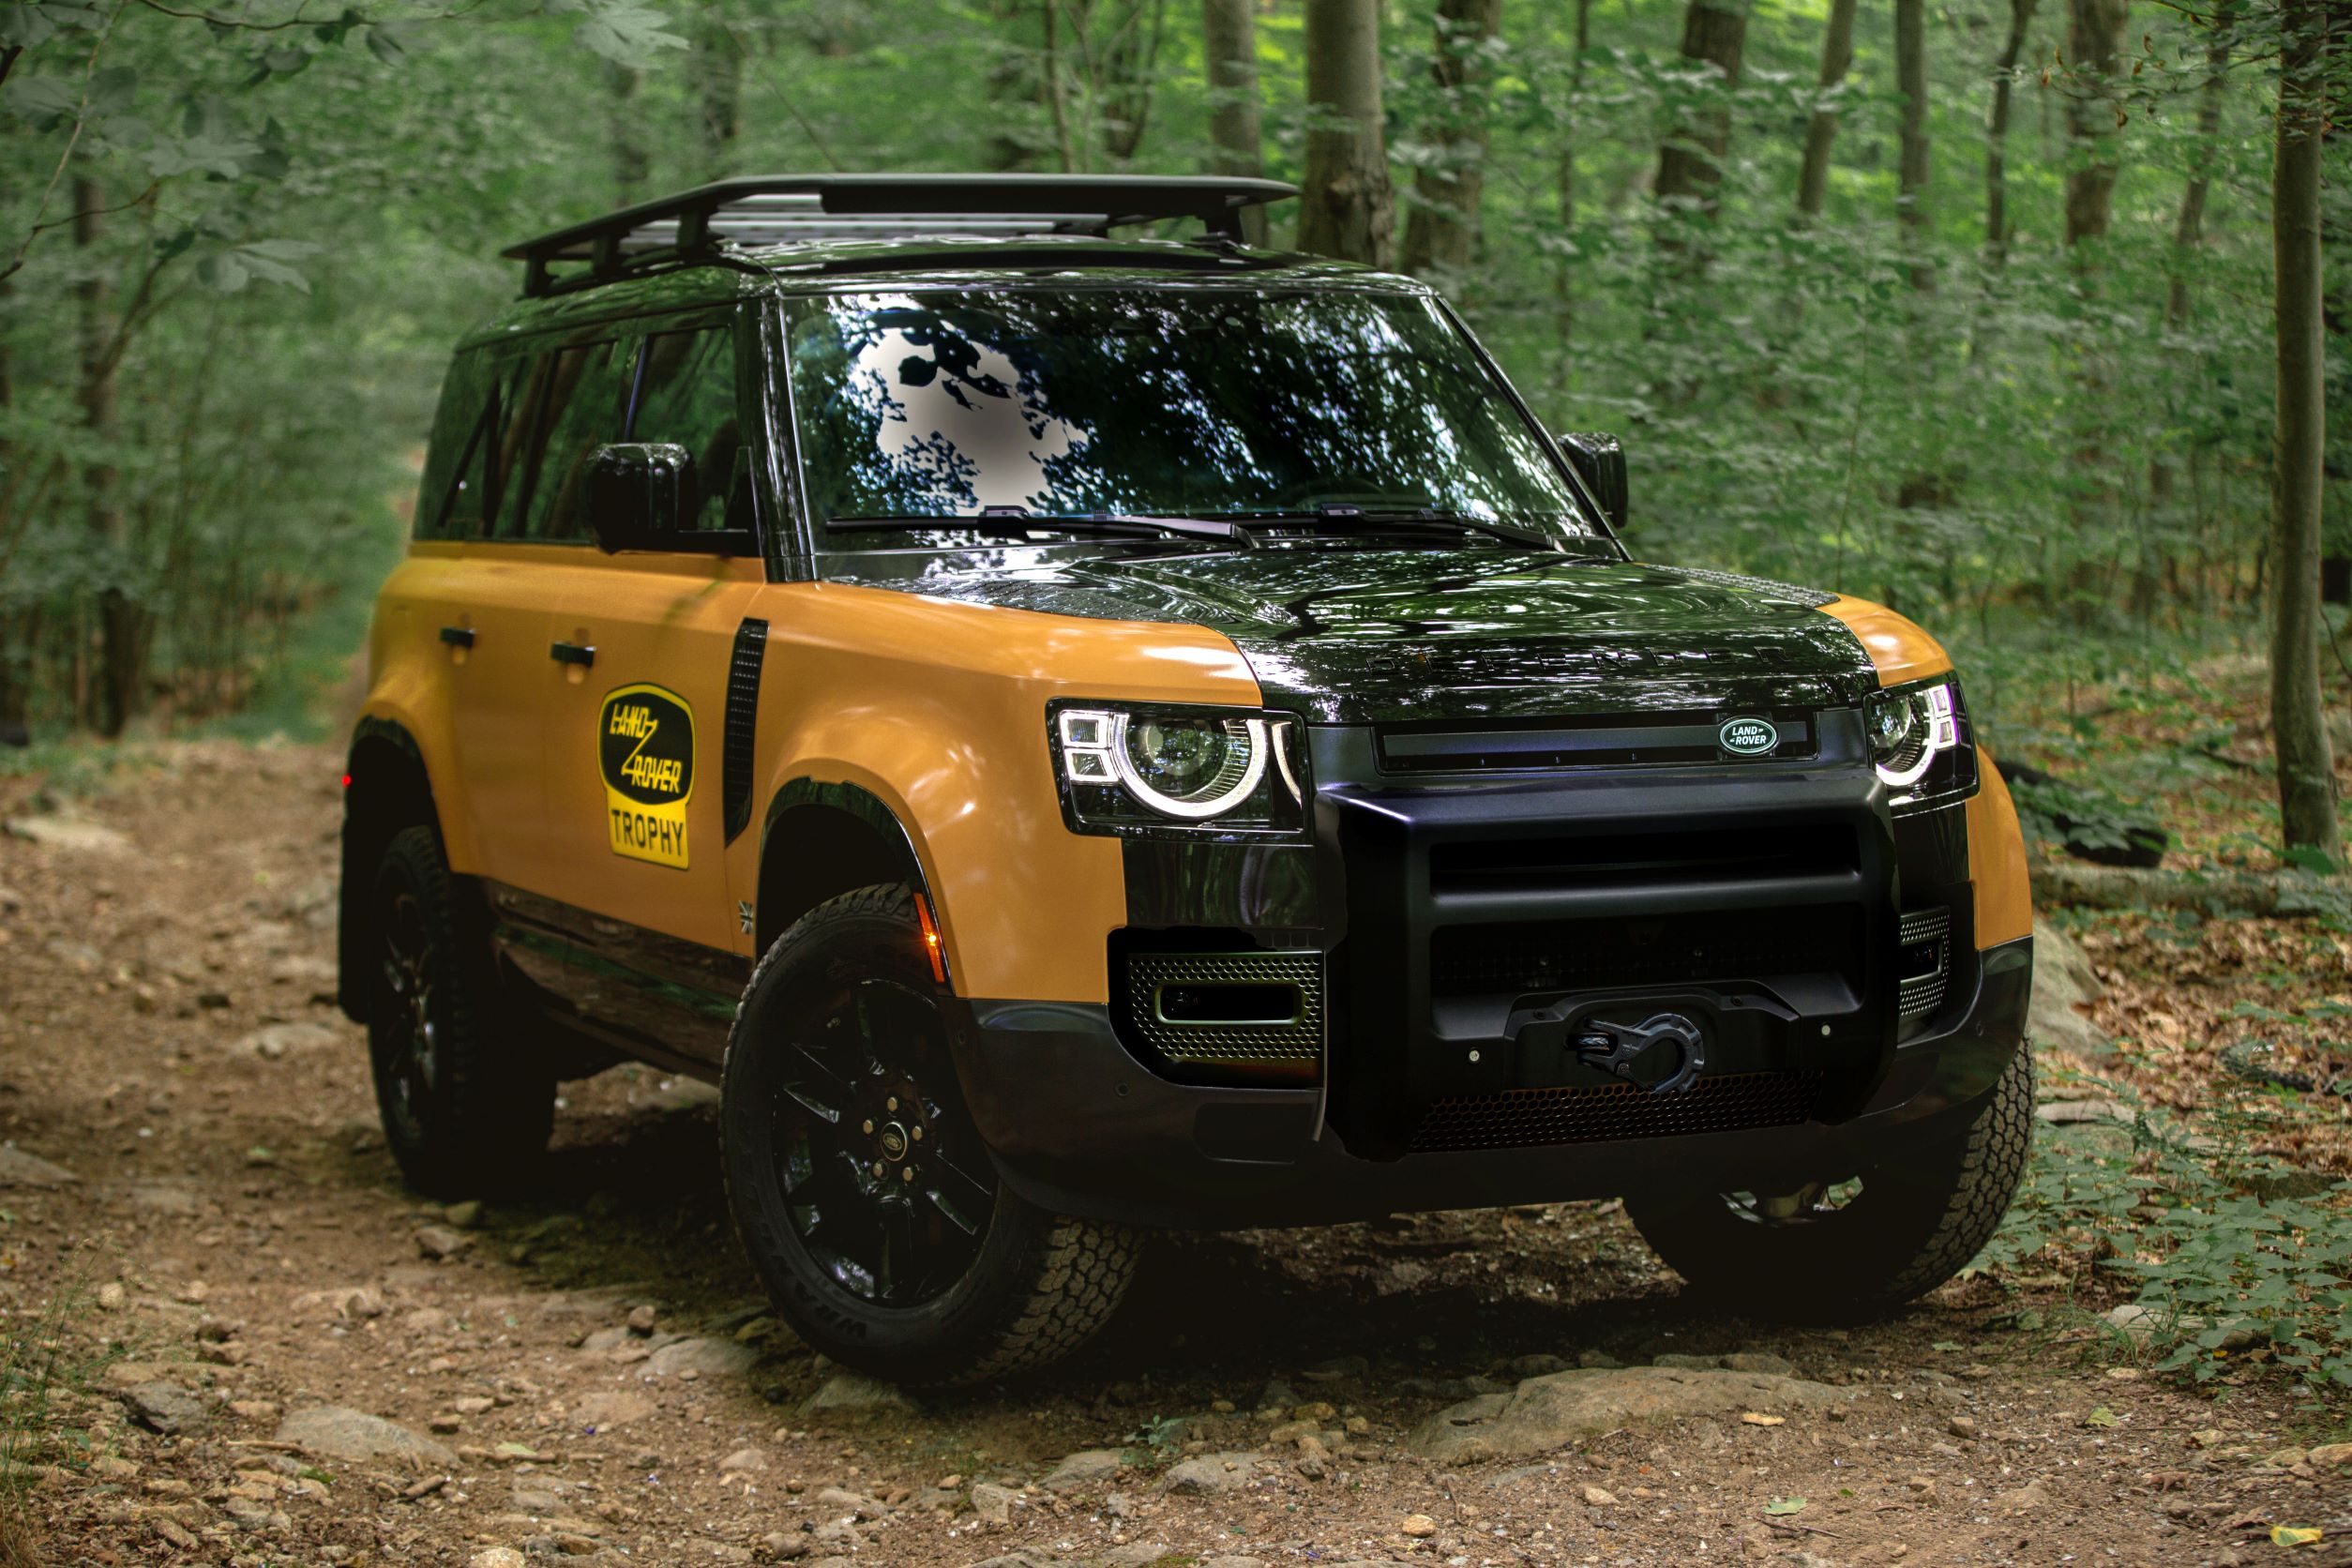 The yellow-and-black 2022 Land Rover Defender Trophy Edition with optional winch in a forest